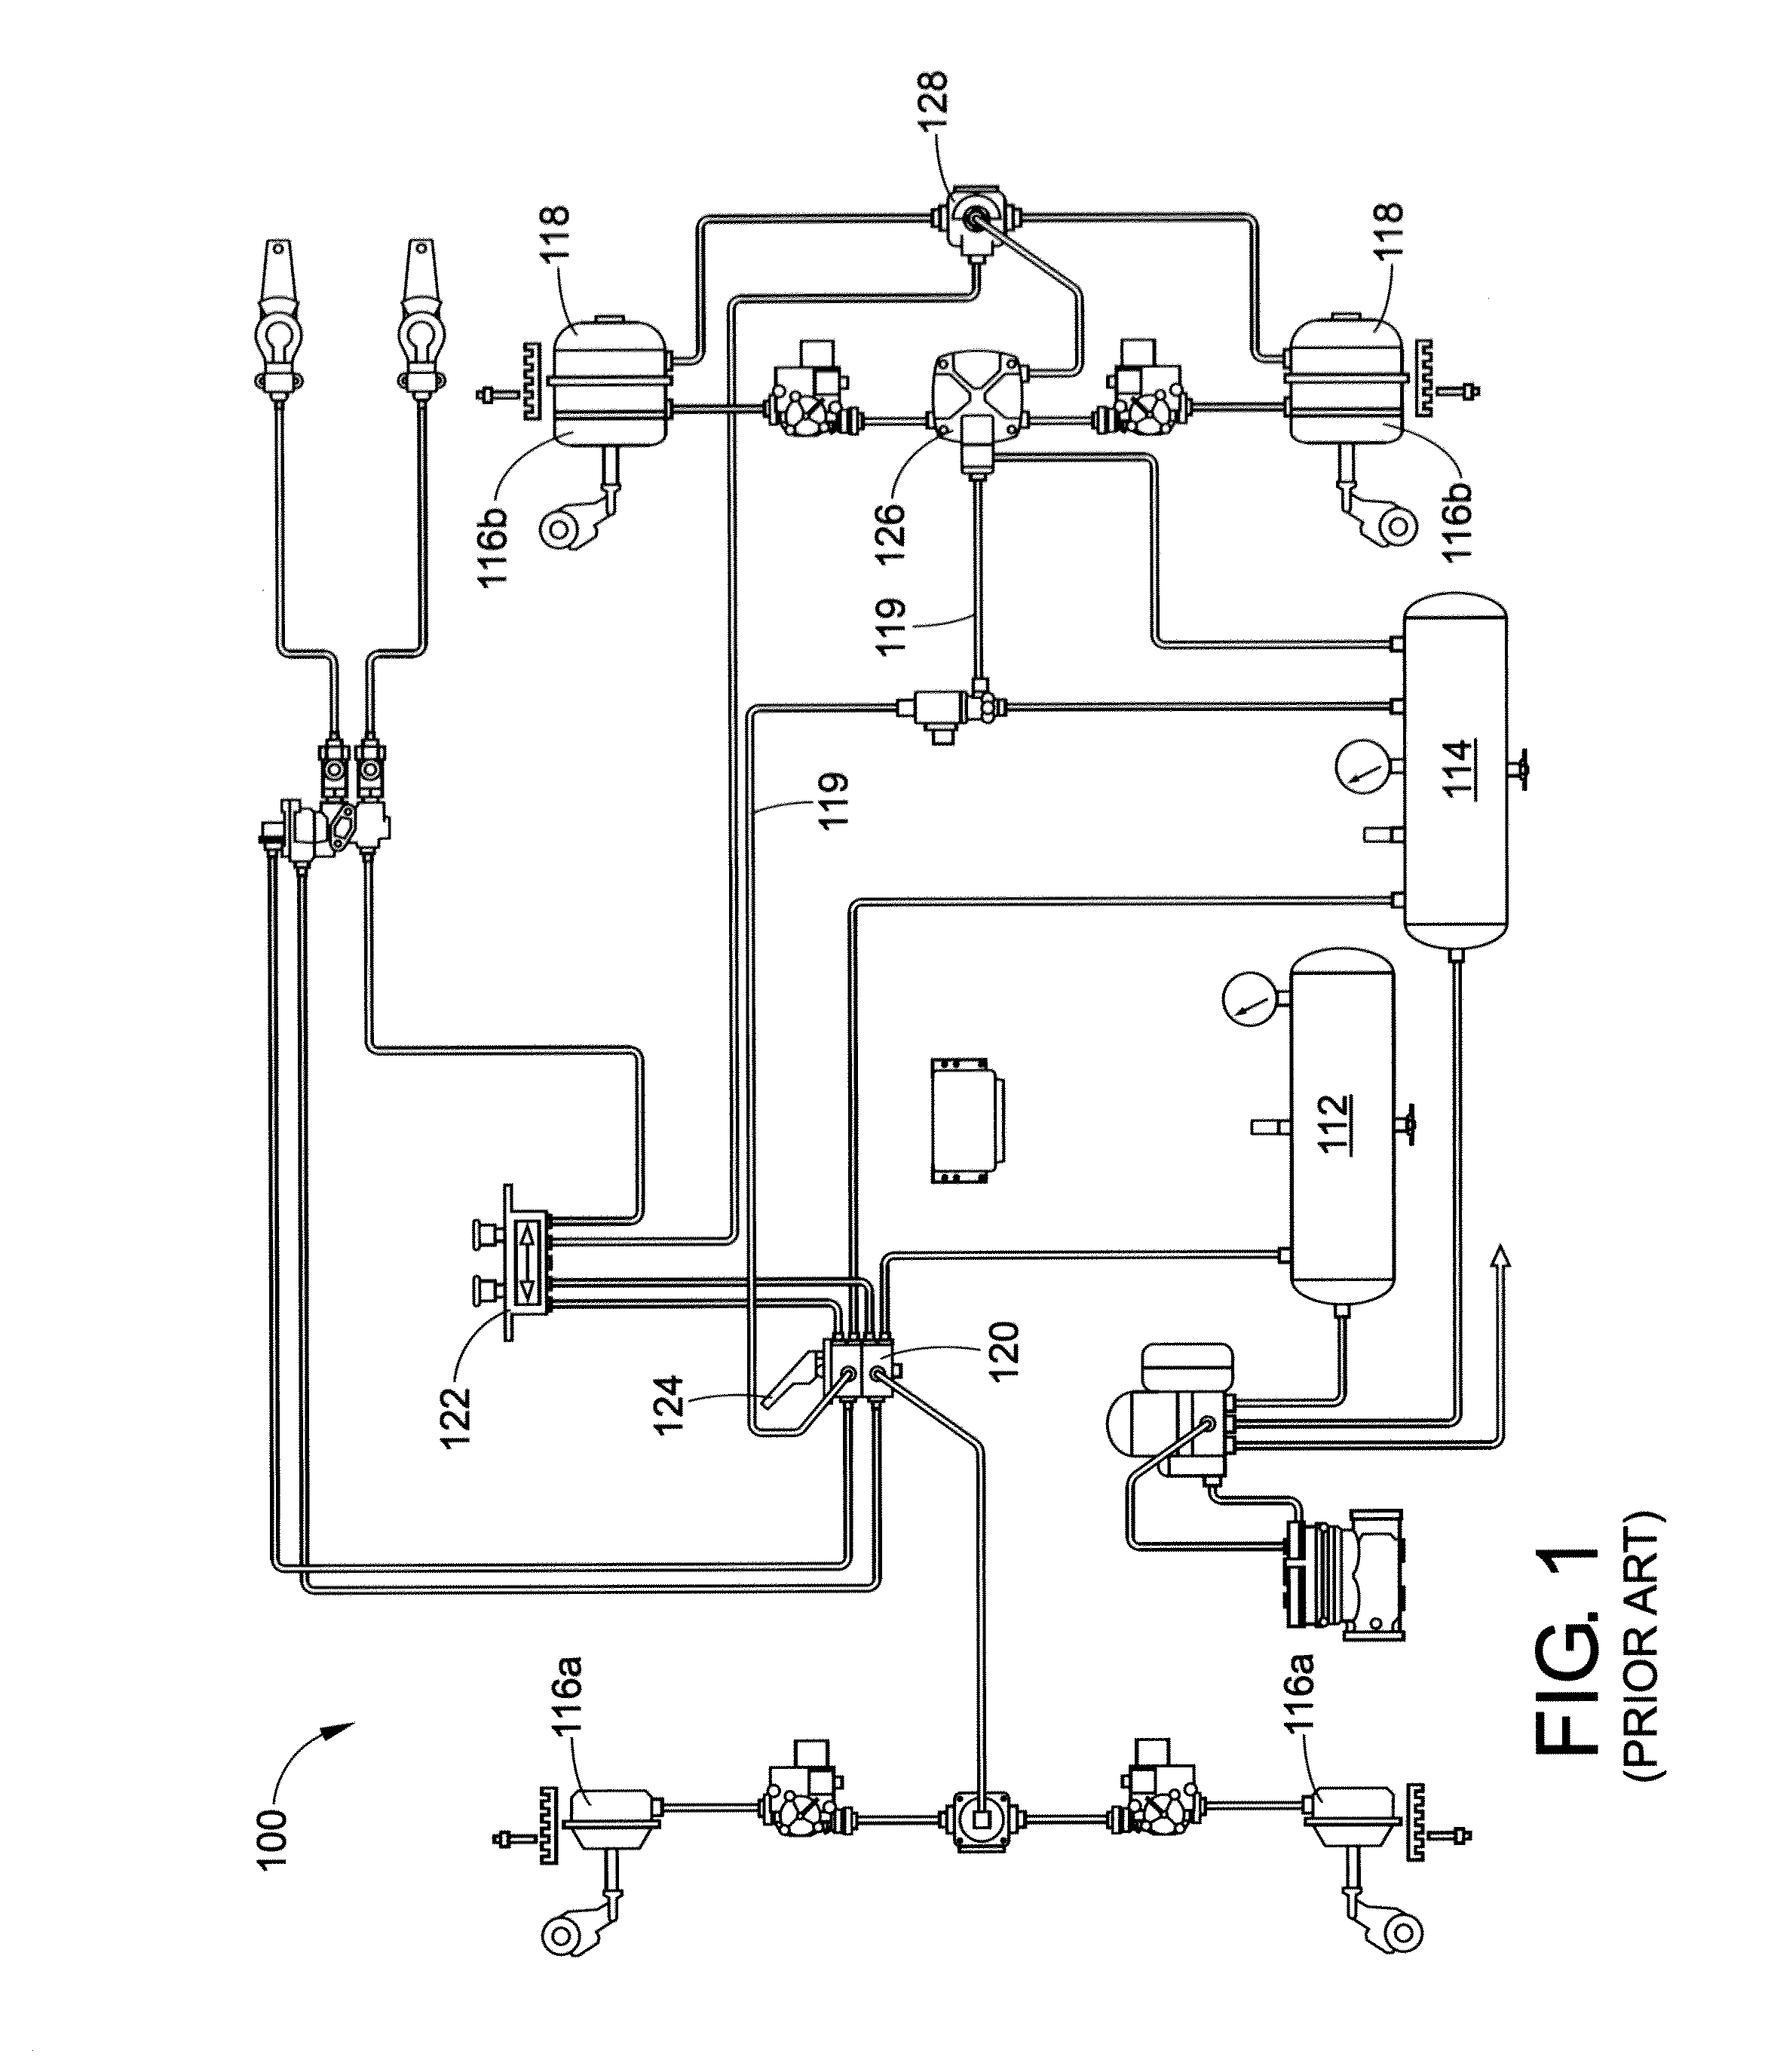 Relay valve control arrangement to provide variable response timing on full applications